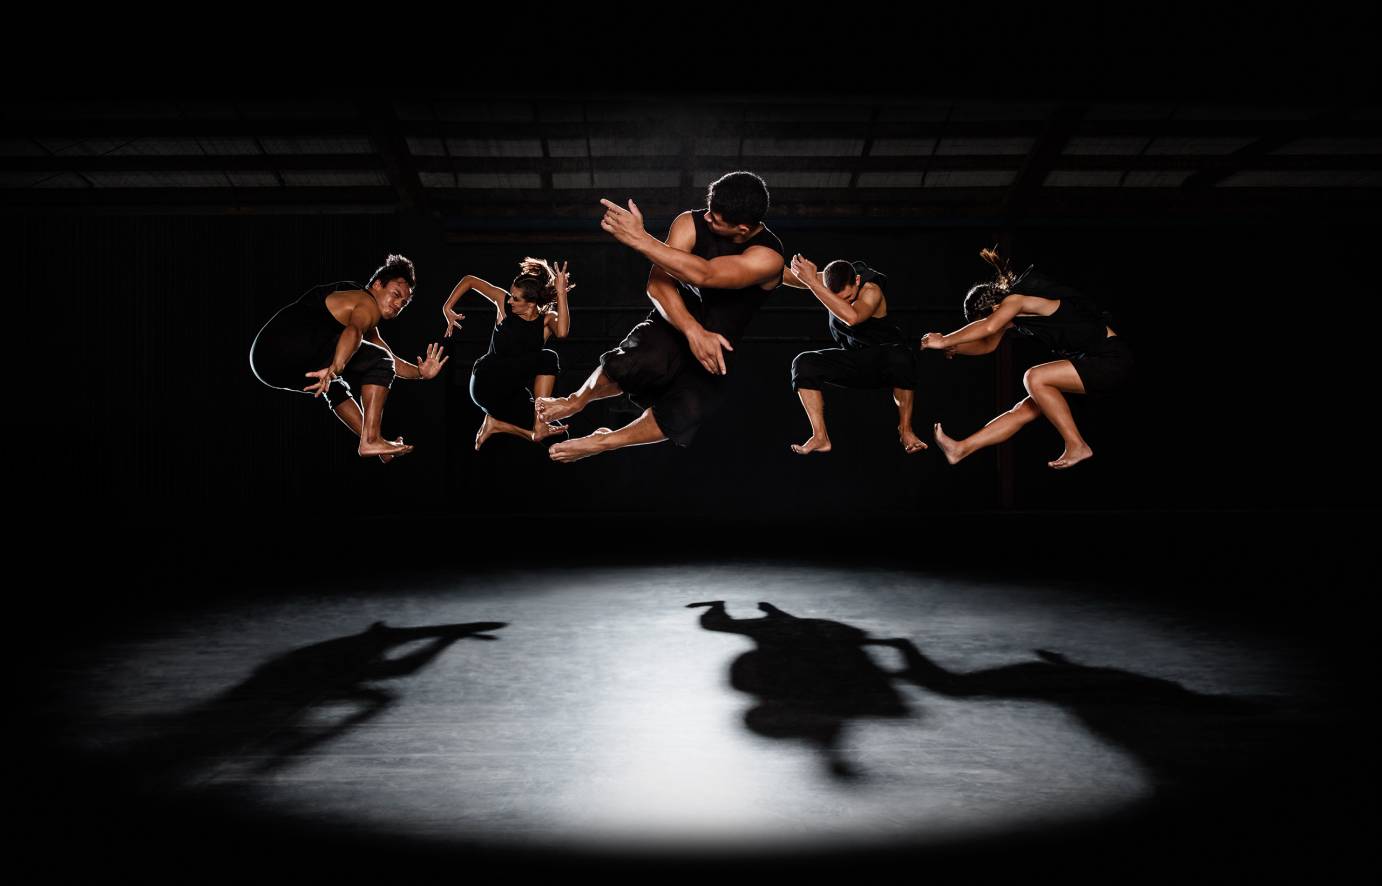 Dancers in black jump into the air, their bodies balled up